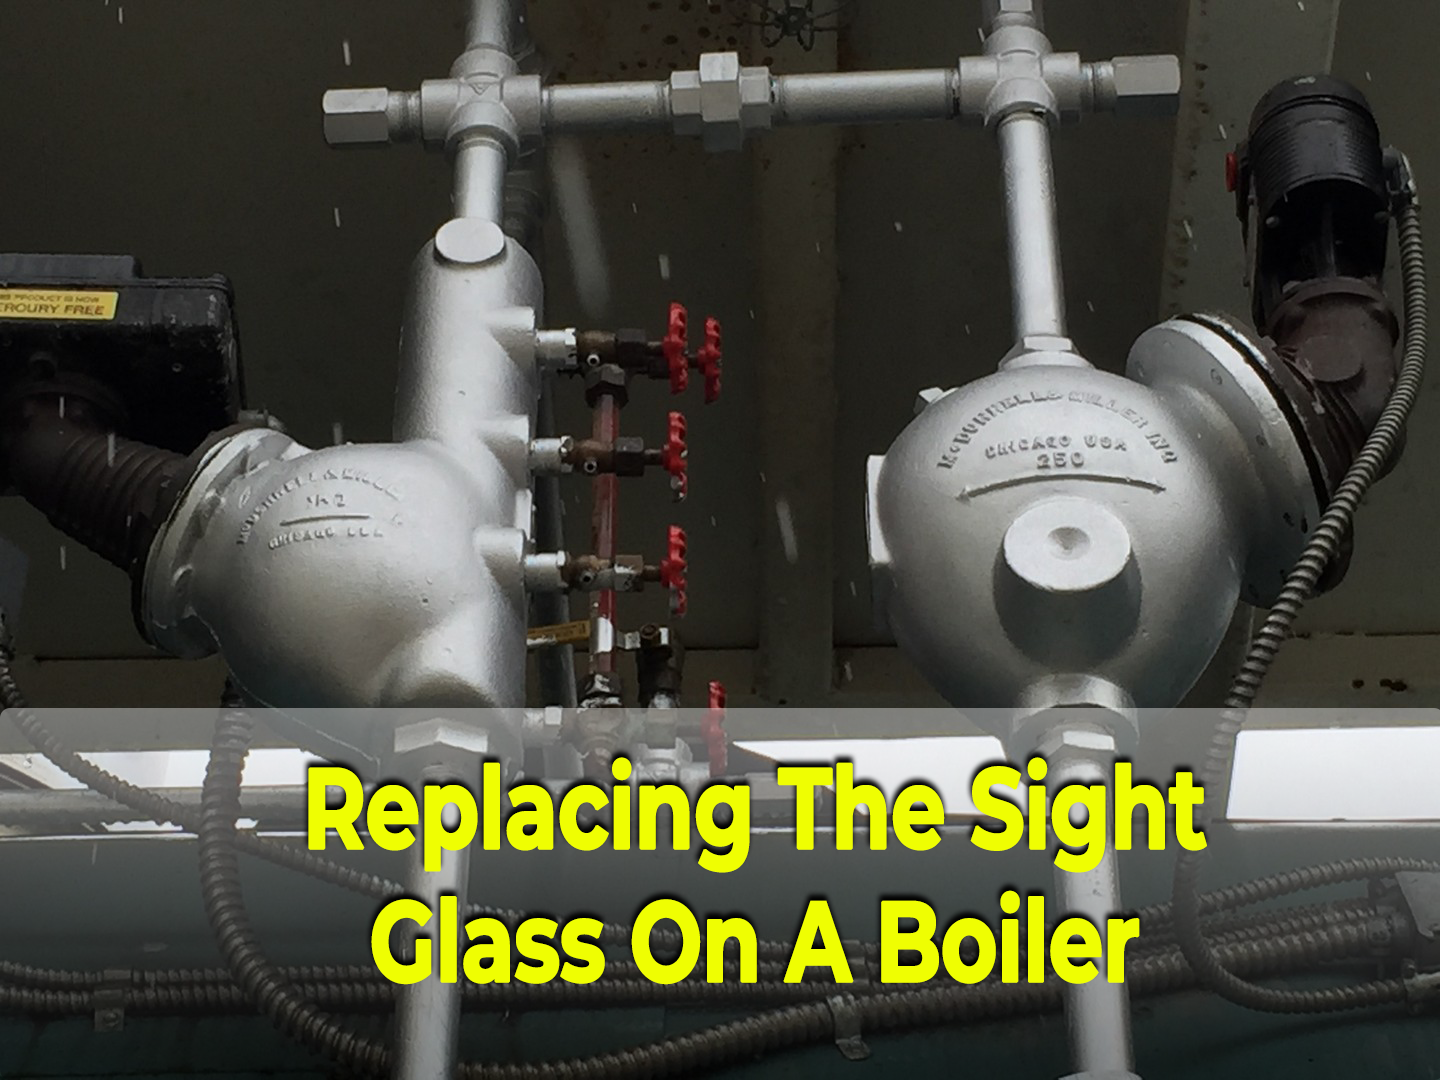 What You Should Know About Your Boiler's Water Level Gage Glass, 2021-02-03